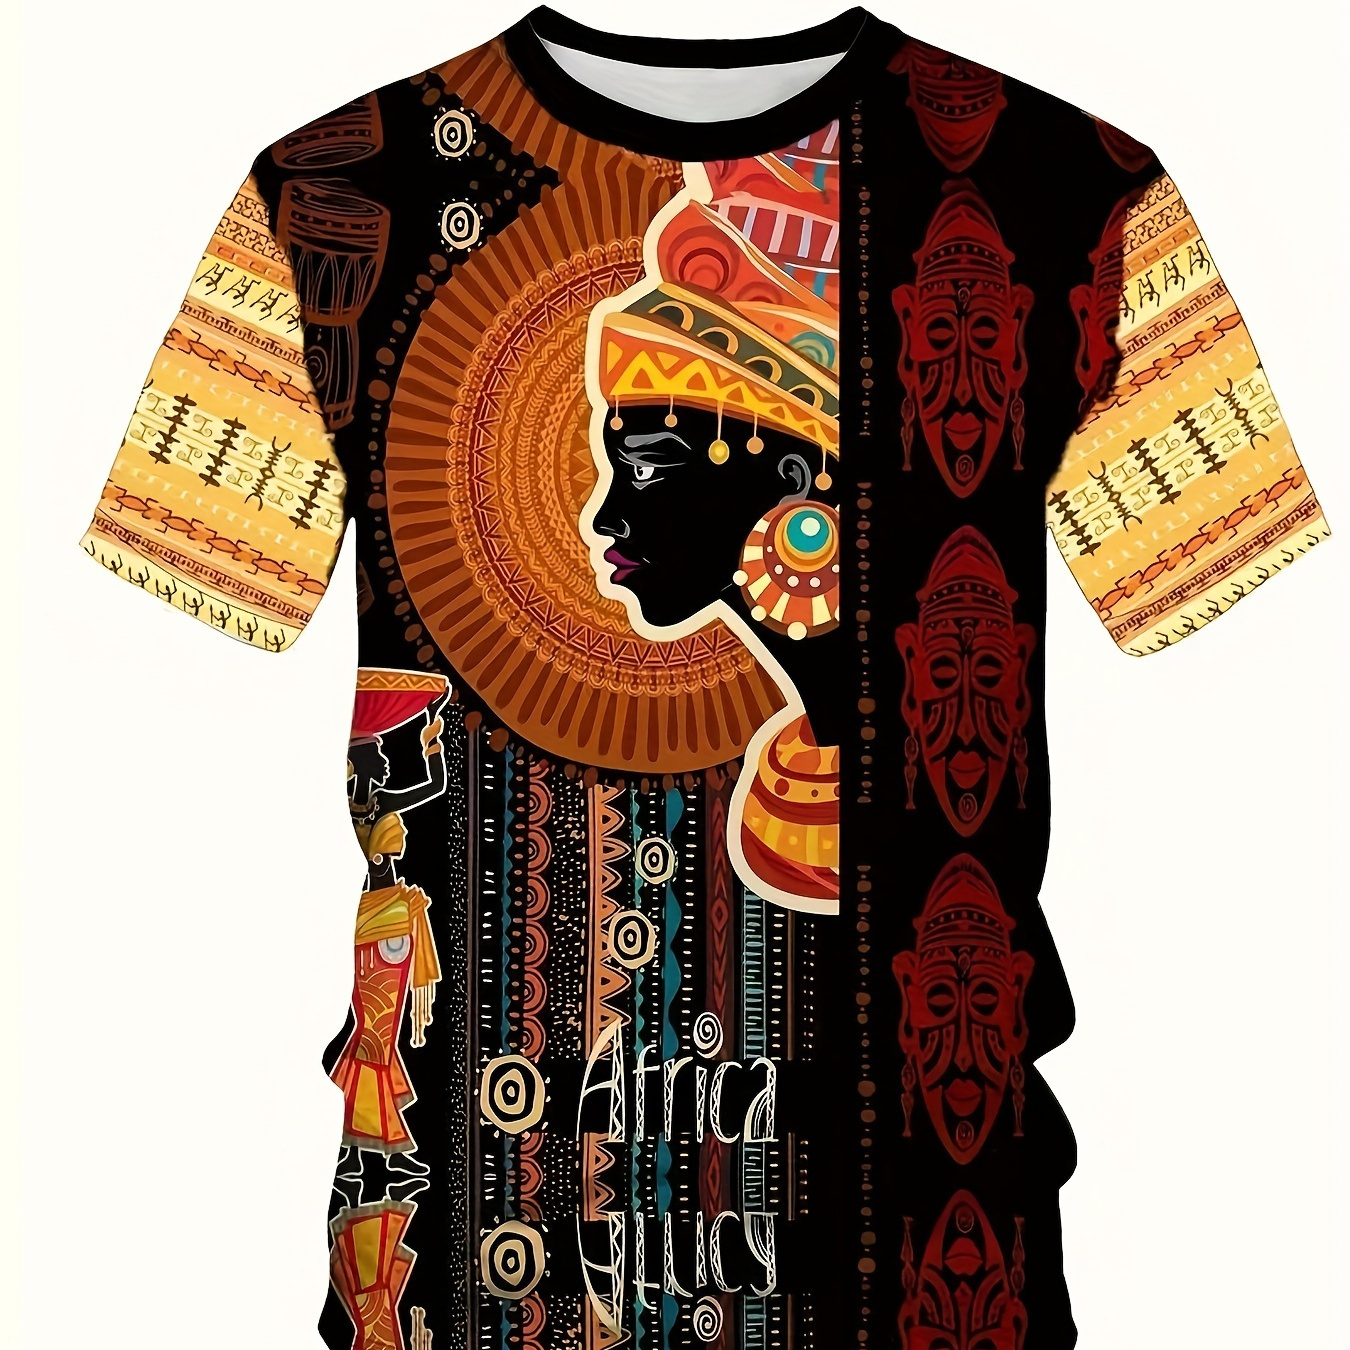 

Africa Tribal Pattern Print Crew Neck Short Sleeve T-shirt For Men, Casual Summer T-shirt For Daily Wear And Vacation Resorts